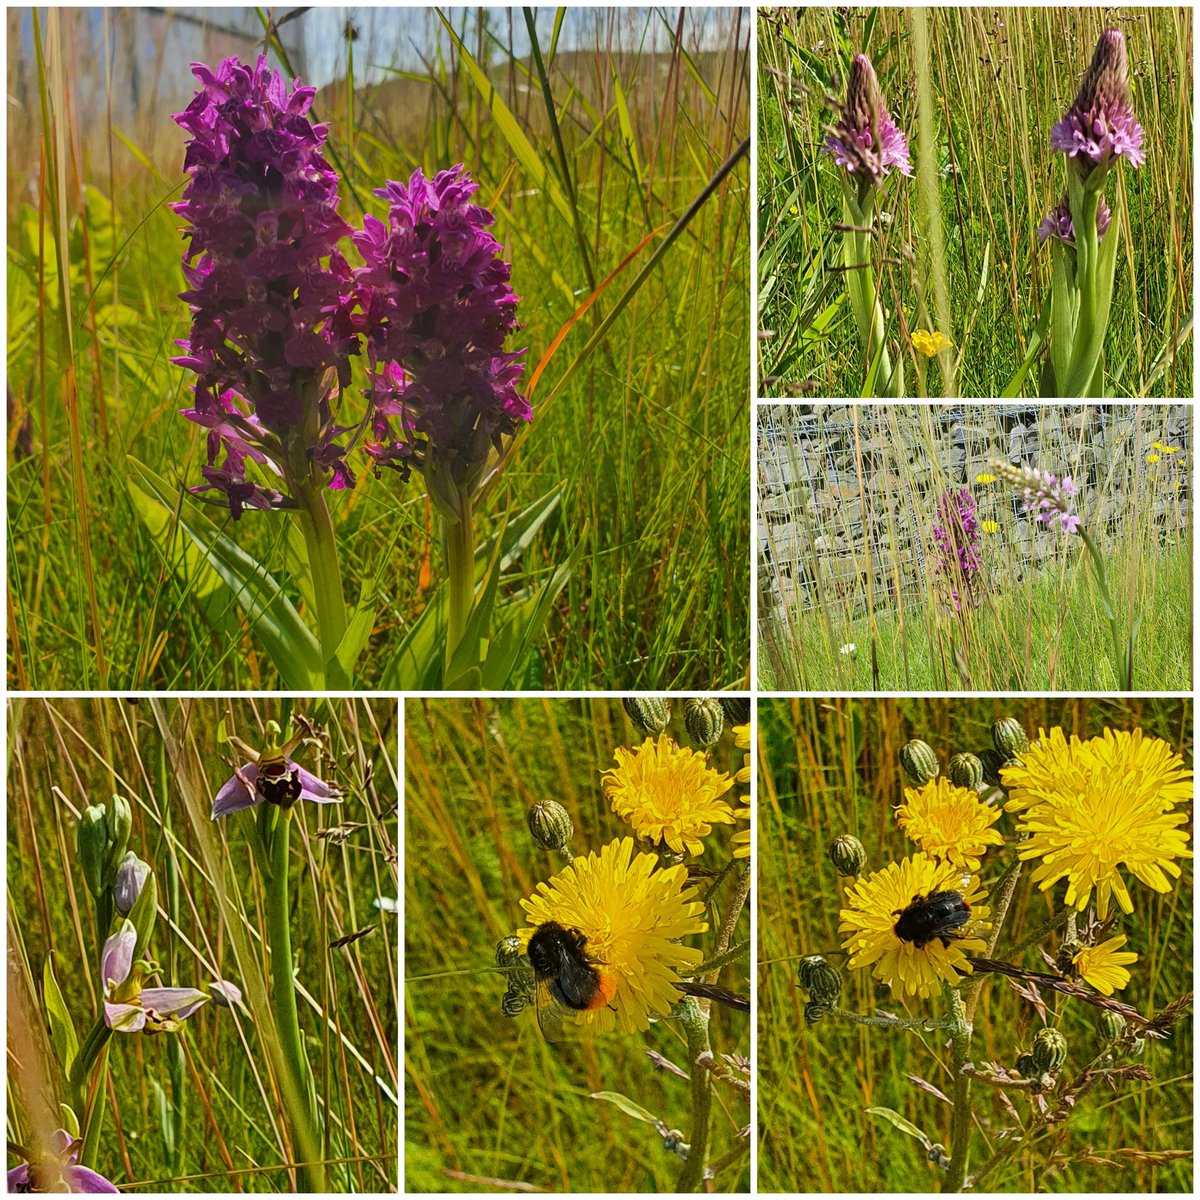 Our Team will be at Dalton Park Shopping Outlet 11am to 2pm 22nd May as we re-open the gates at the #PollinatorParks Garden next to M&S. Pop in to see us and find out about the #wildflowers #orchids and #pollinators we have onsite. Might see you there. 🌏🐝🌿🌼🌻🐦🦋🐞🌸⚘️🌷